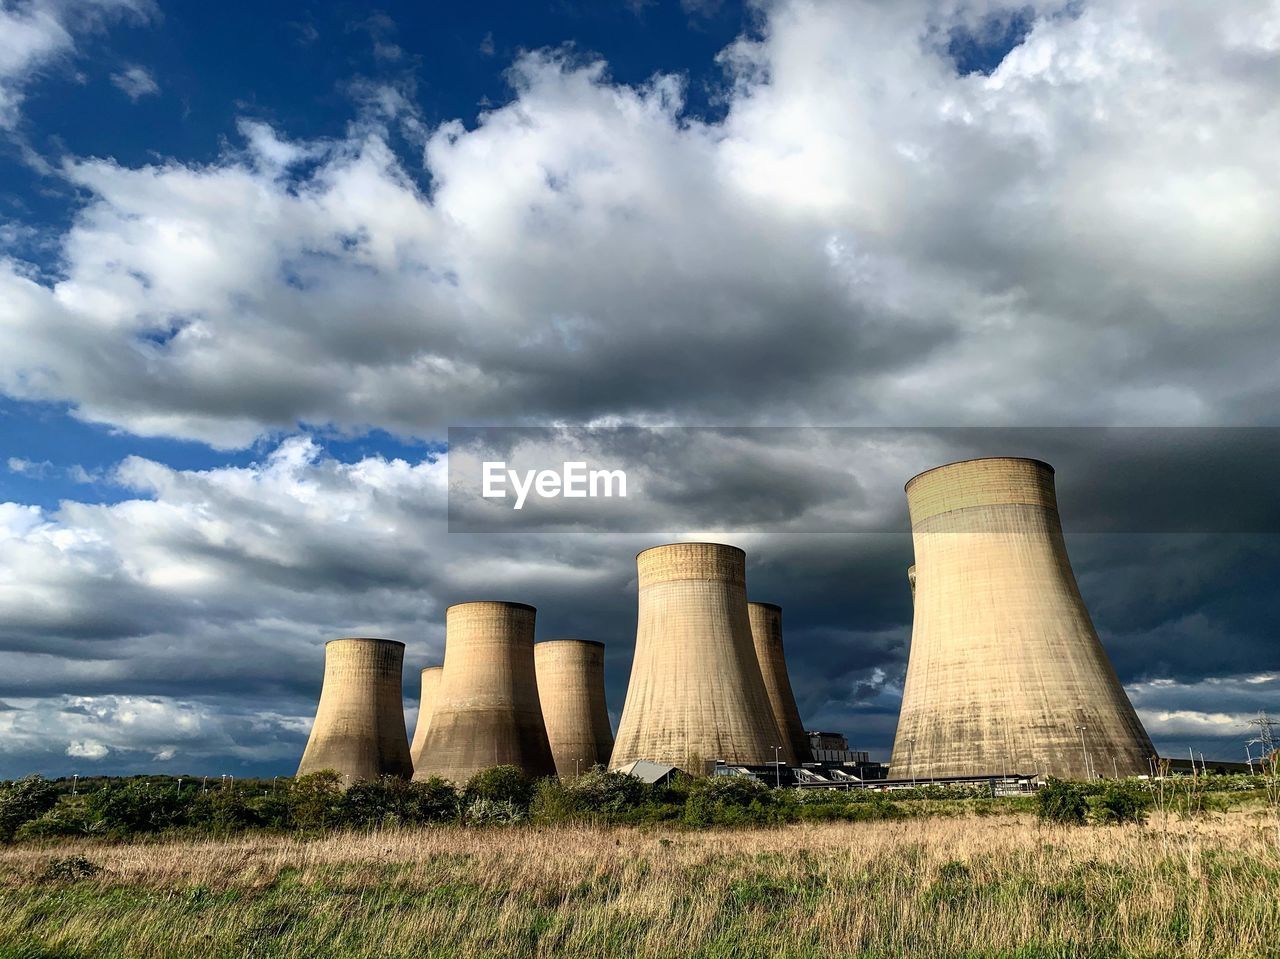 View of cooling towers against blue and  cloudy sky. ratcliffe on soar, coal fired power station.